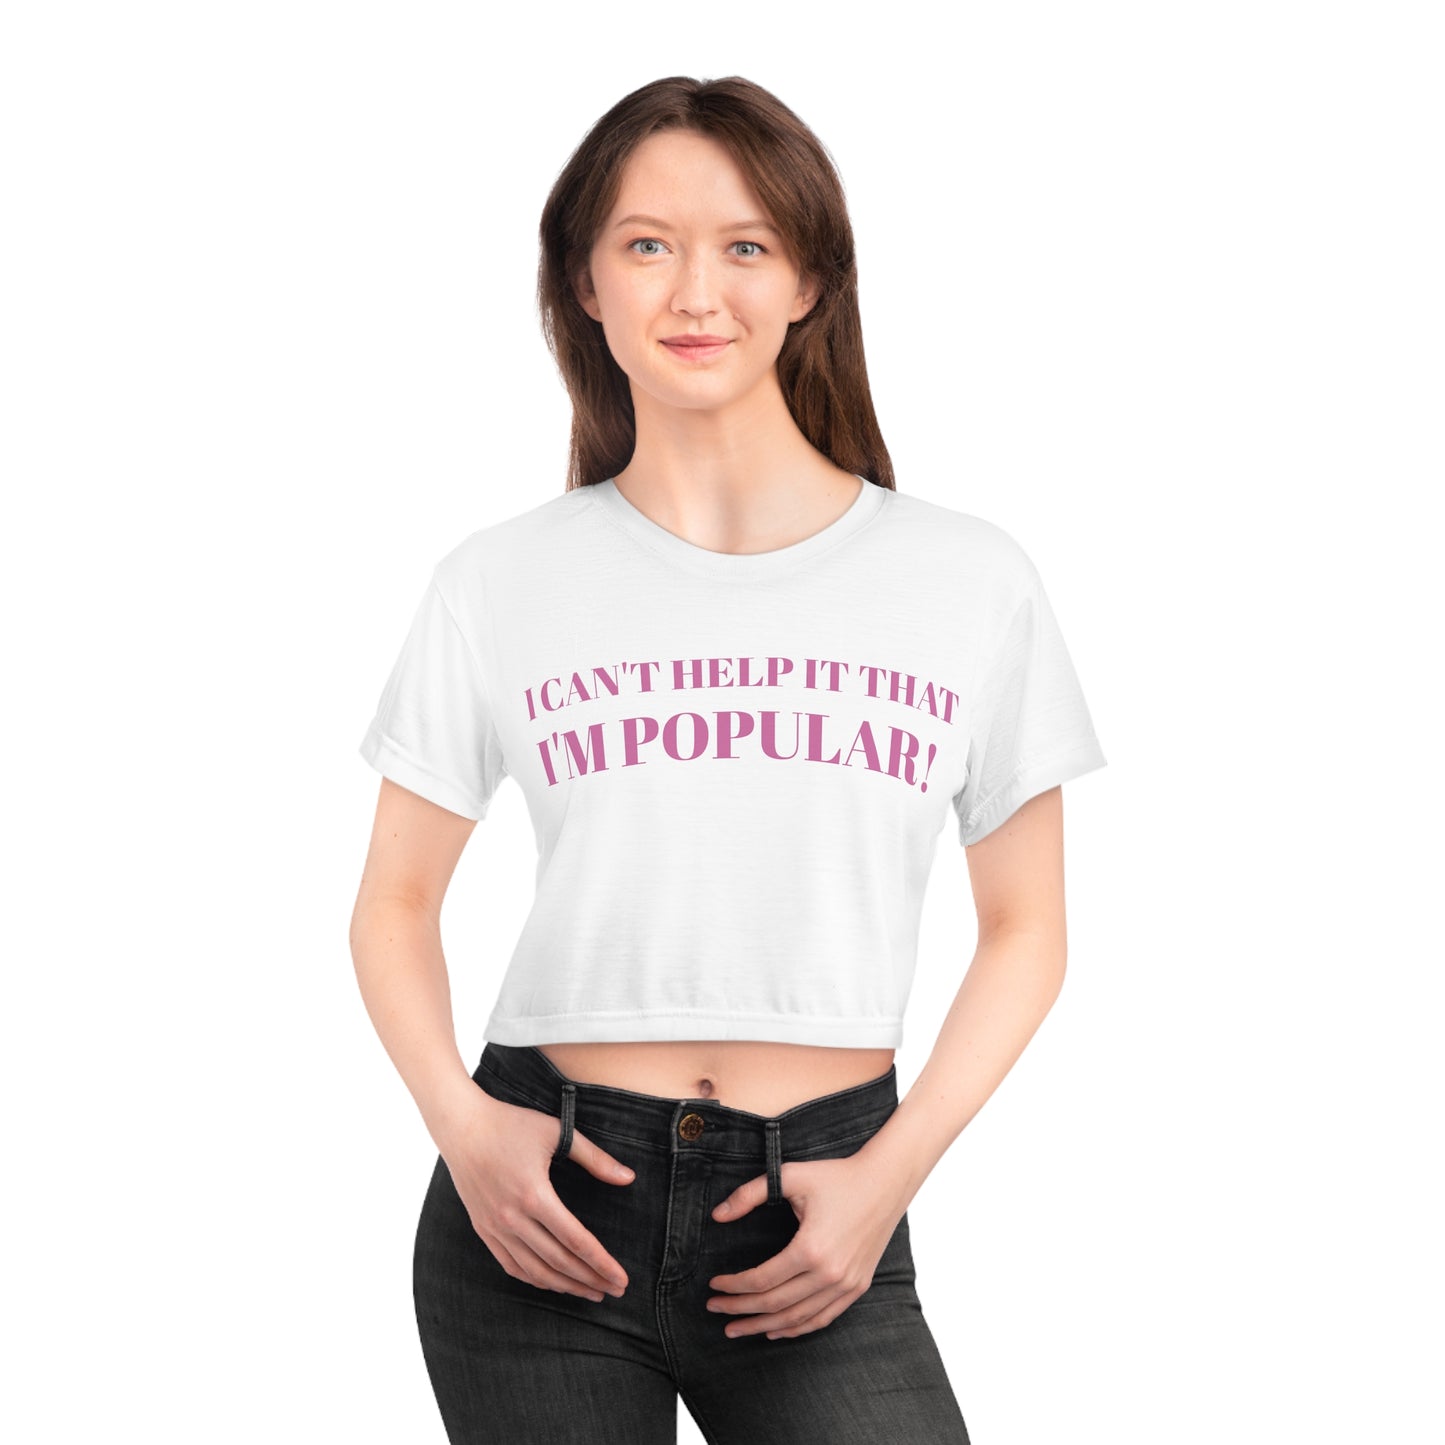 'I CAN'T HELP IT THAT I'M POPULAR' Mean Girls Crop Tee (AOP)